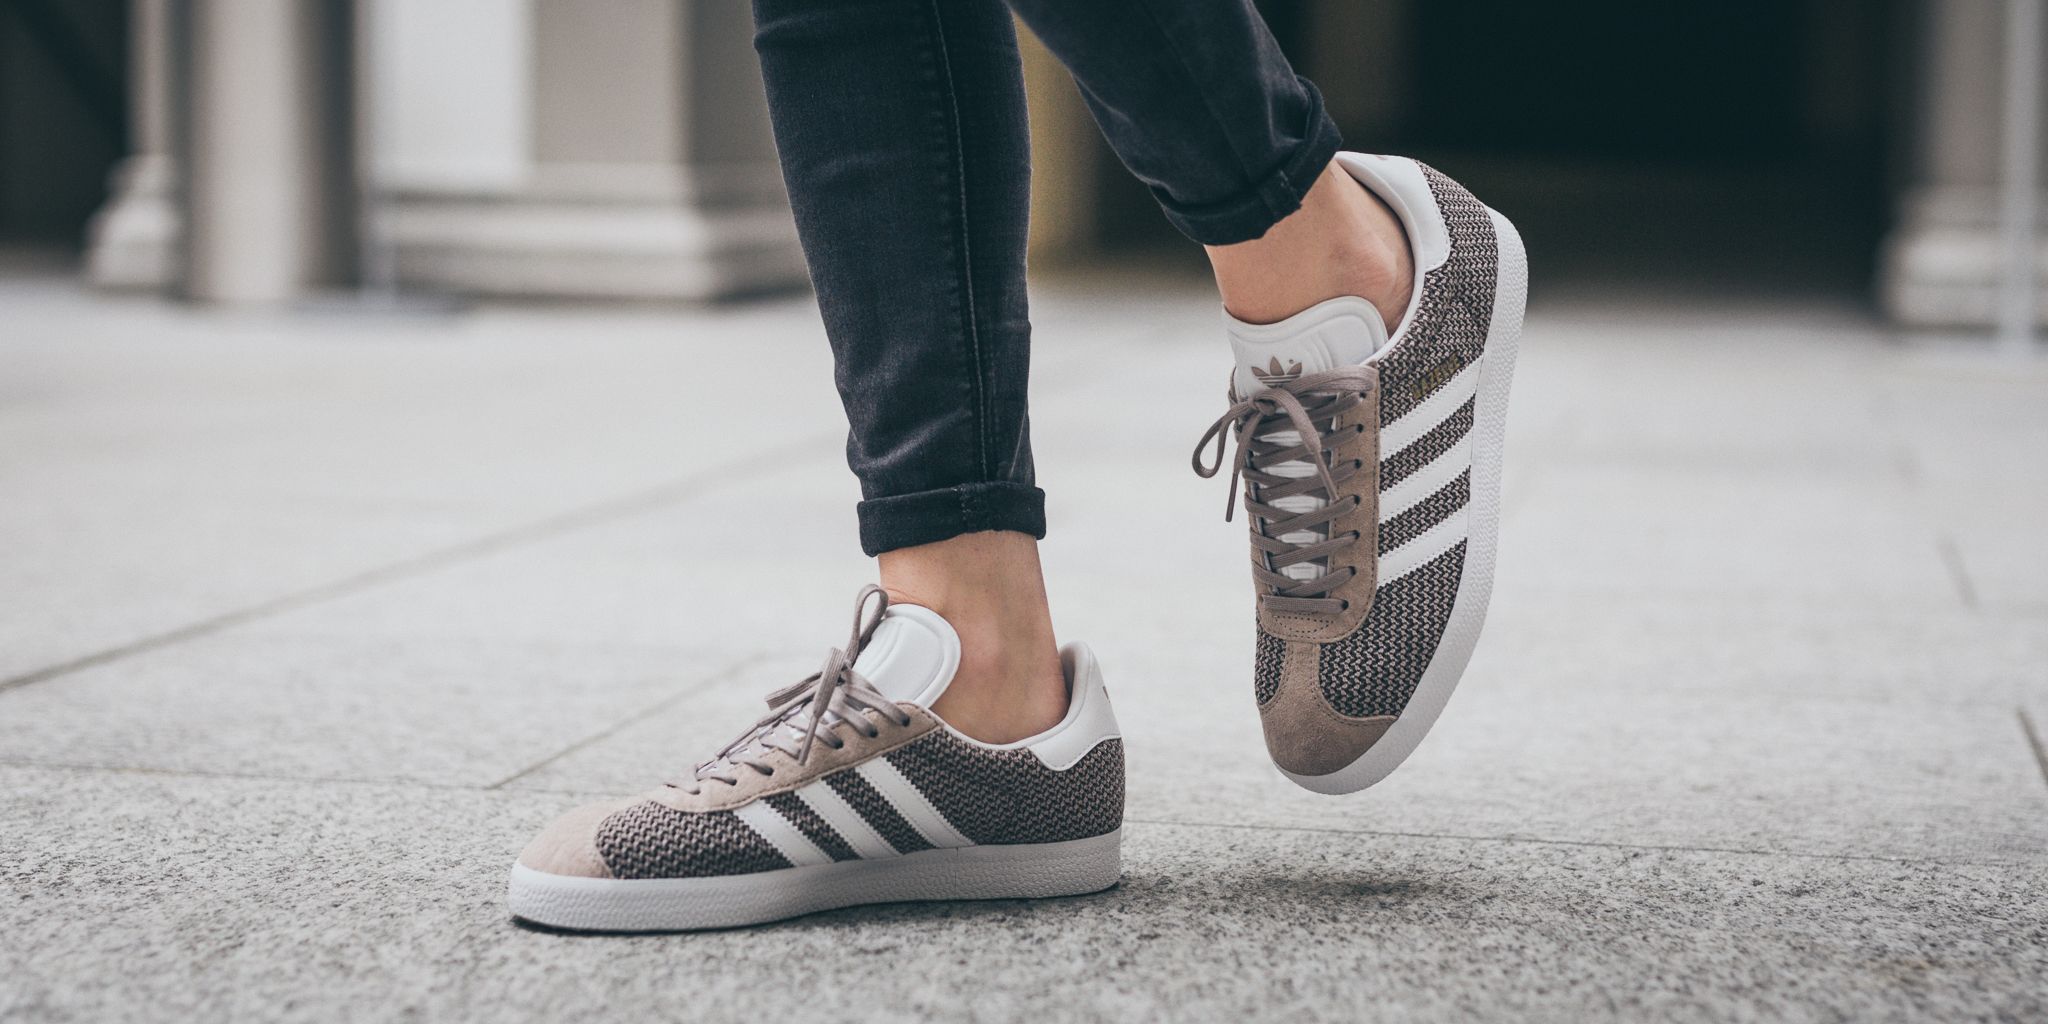 Titolo on Twitter: "NEW Adidas Gazelle W - Vapour Grey/Footwear White/Vapour Grey HERE: https://t.co/PPfBwYauzp https://t.co/q6udxhFOwh"